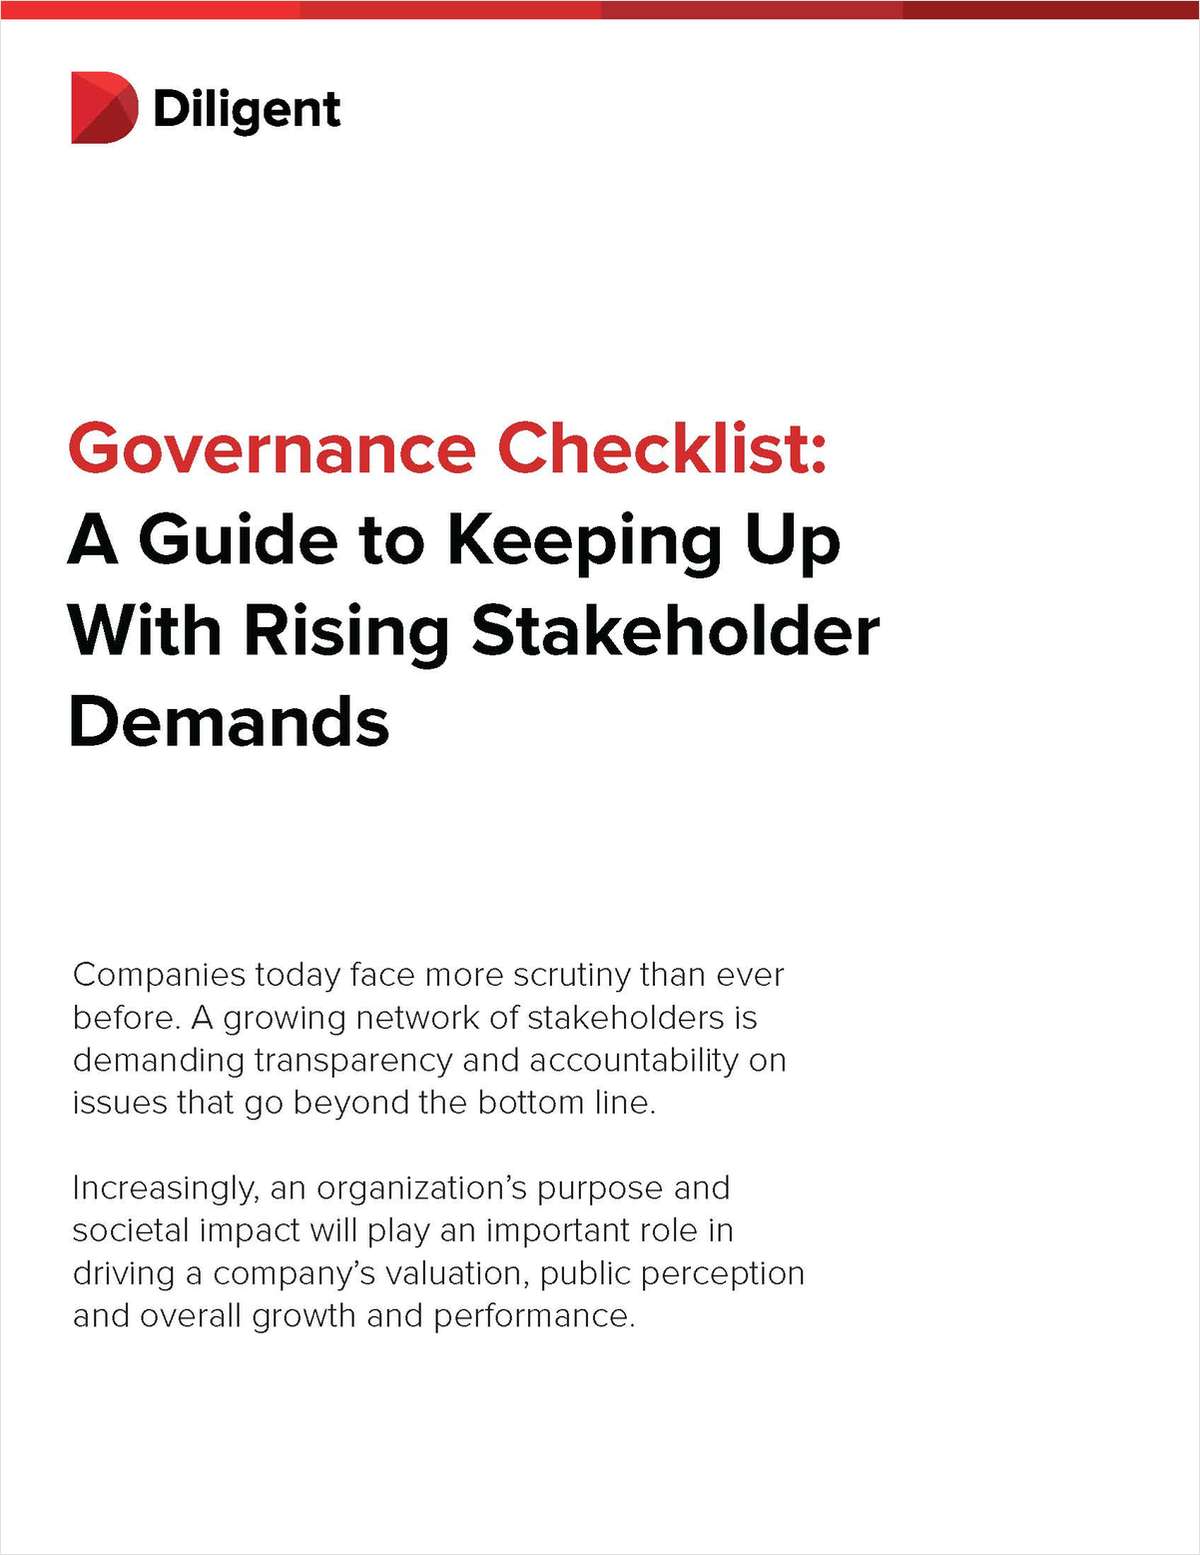 Governance Checklist: A Guide to Keeping Up With Rising Stakeholder Demands